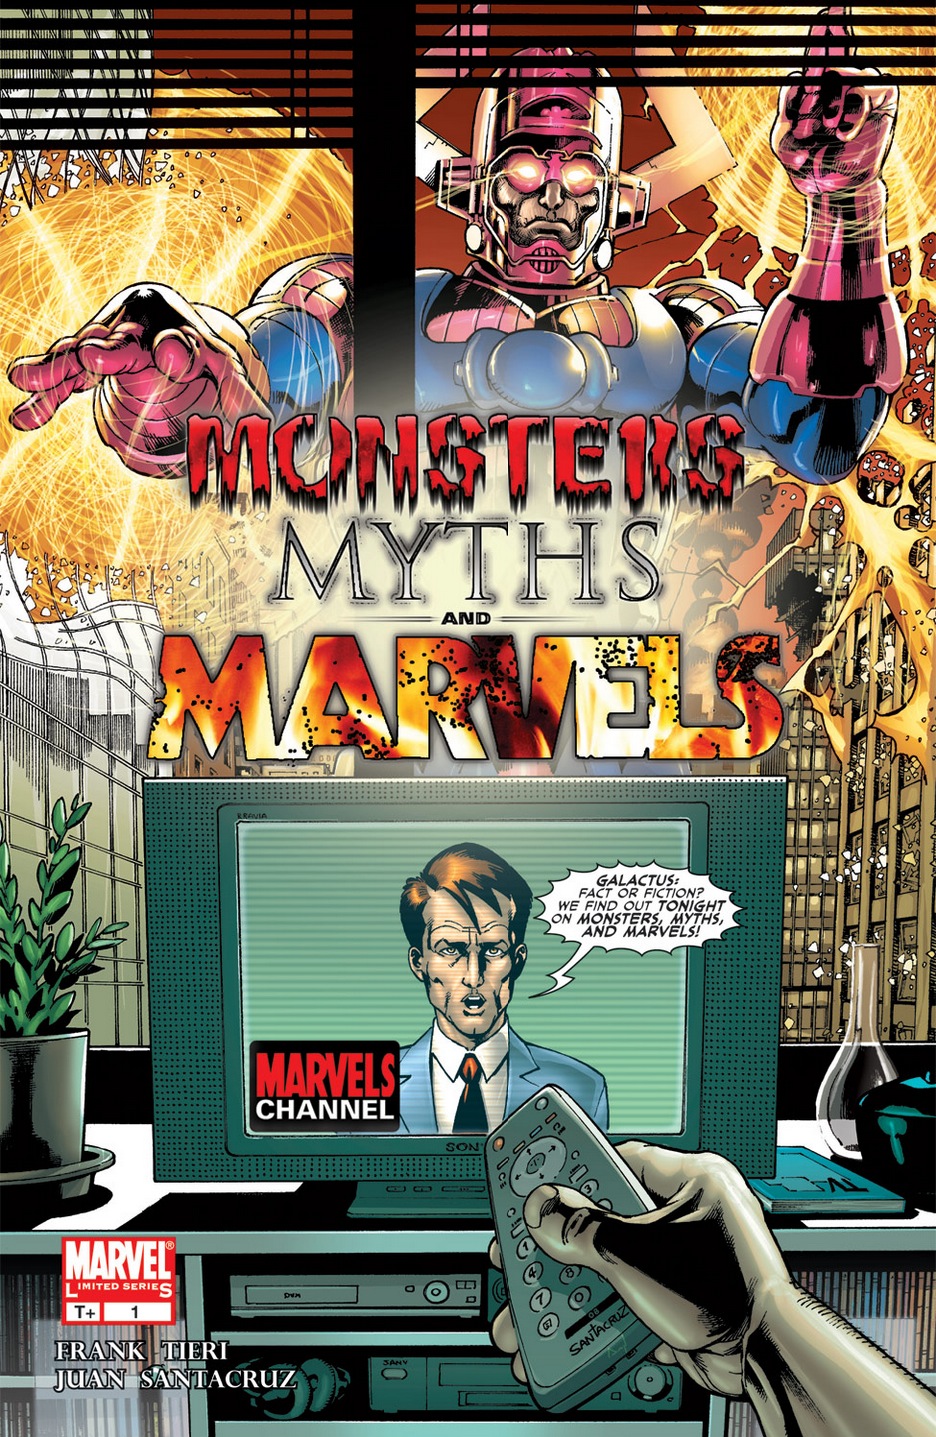 The Marvels Channel: Monsters, Myths, and Marvels Digital Comic (2008) #1